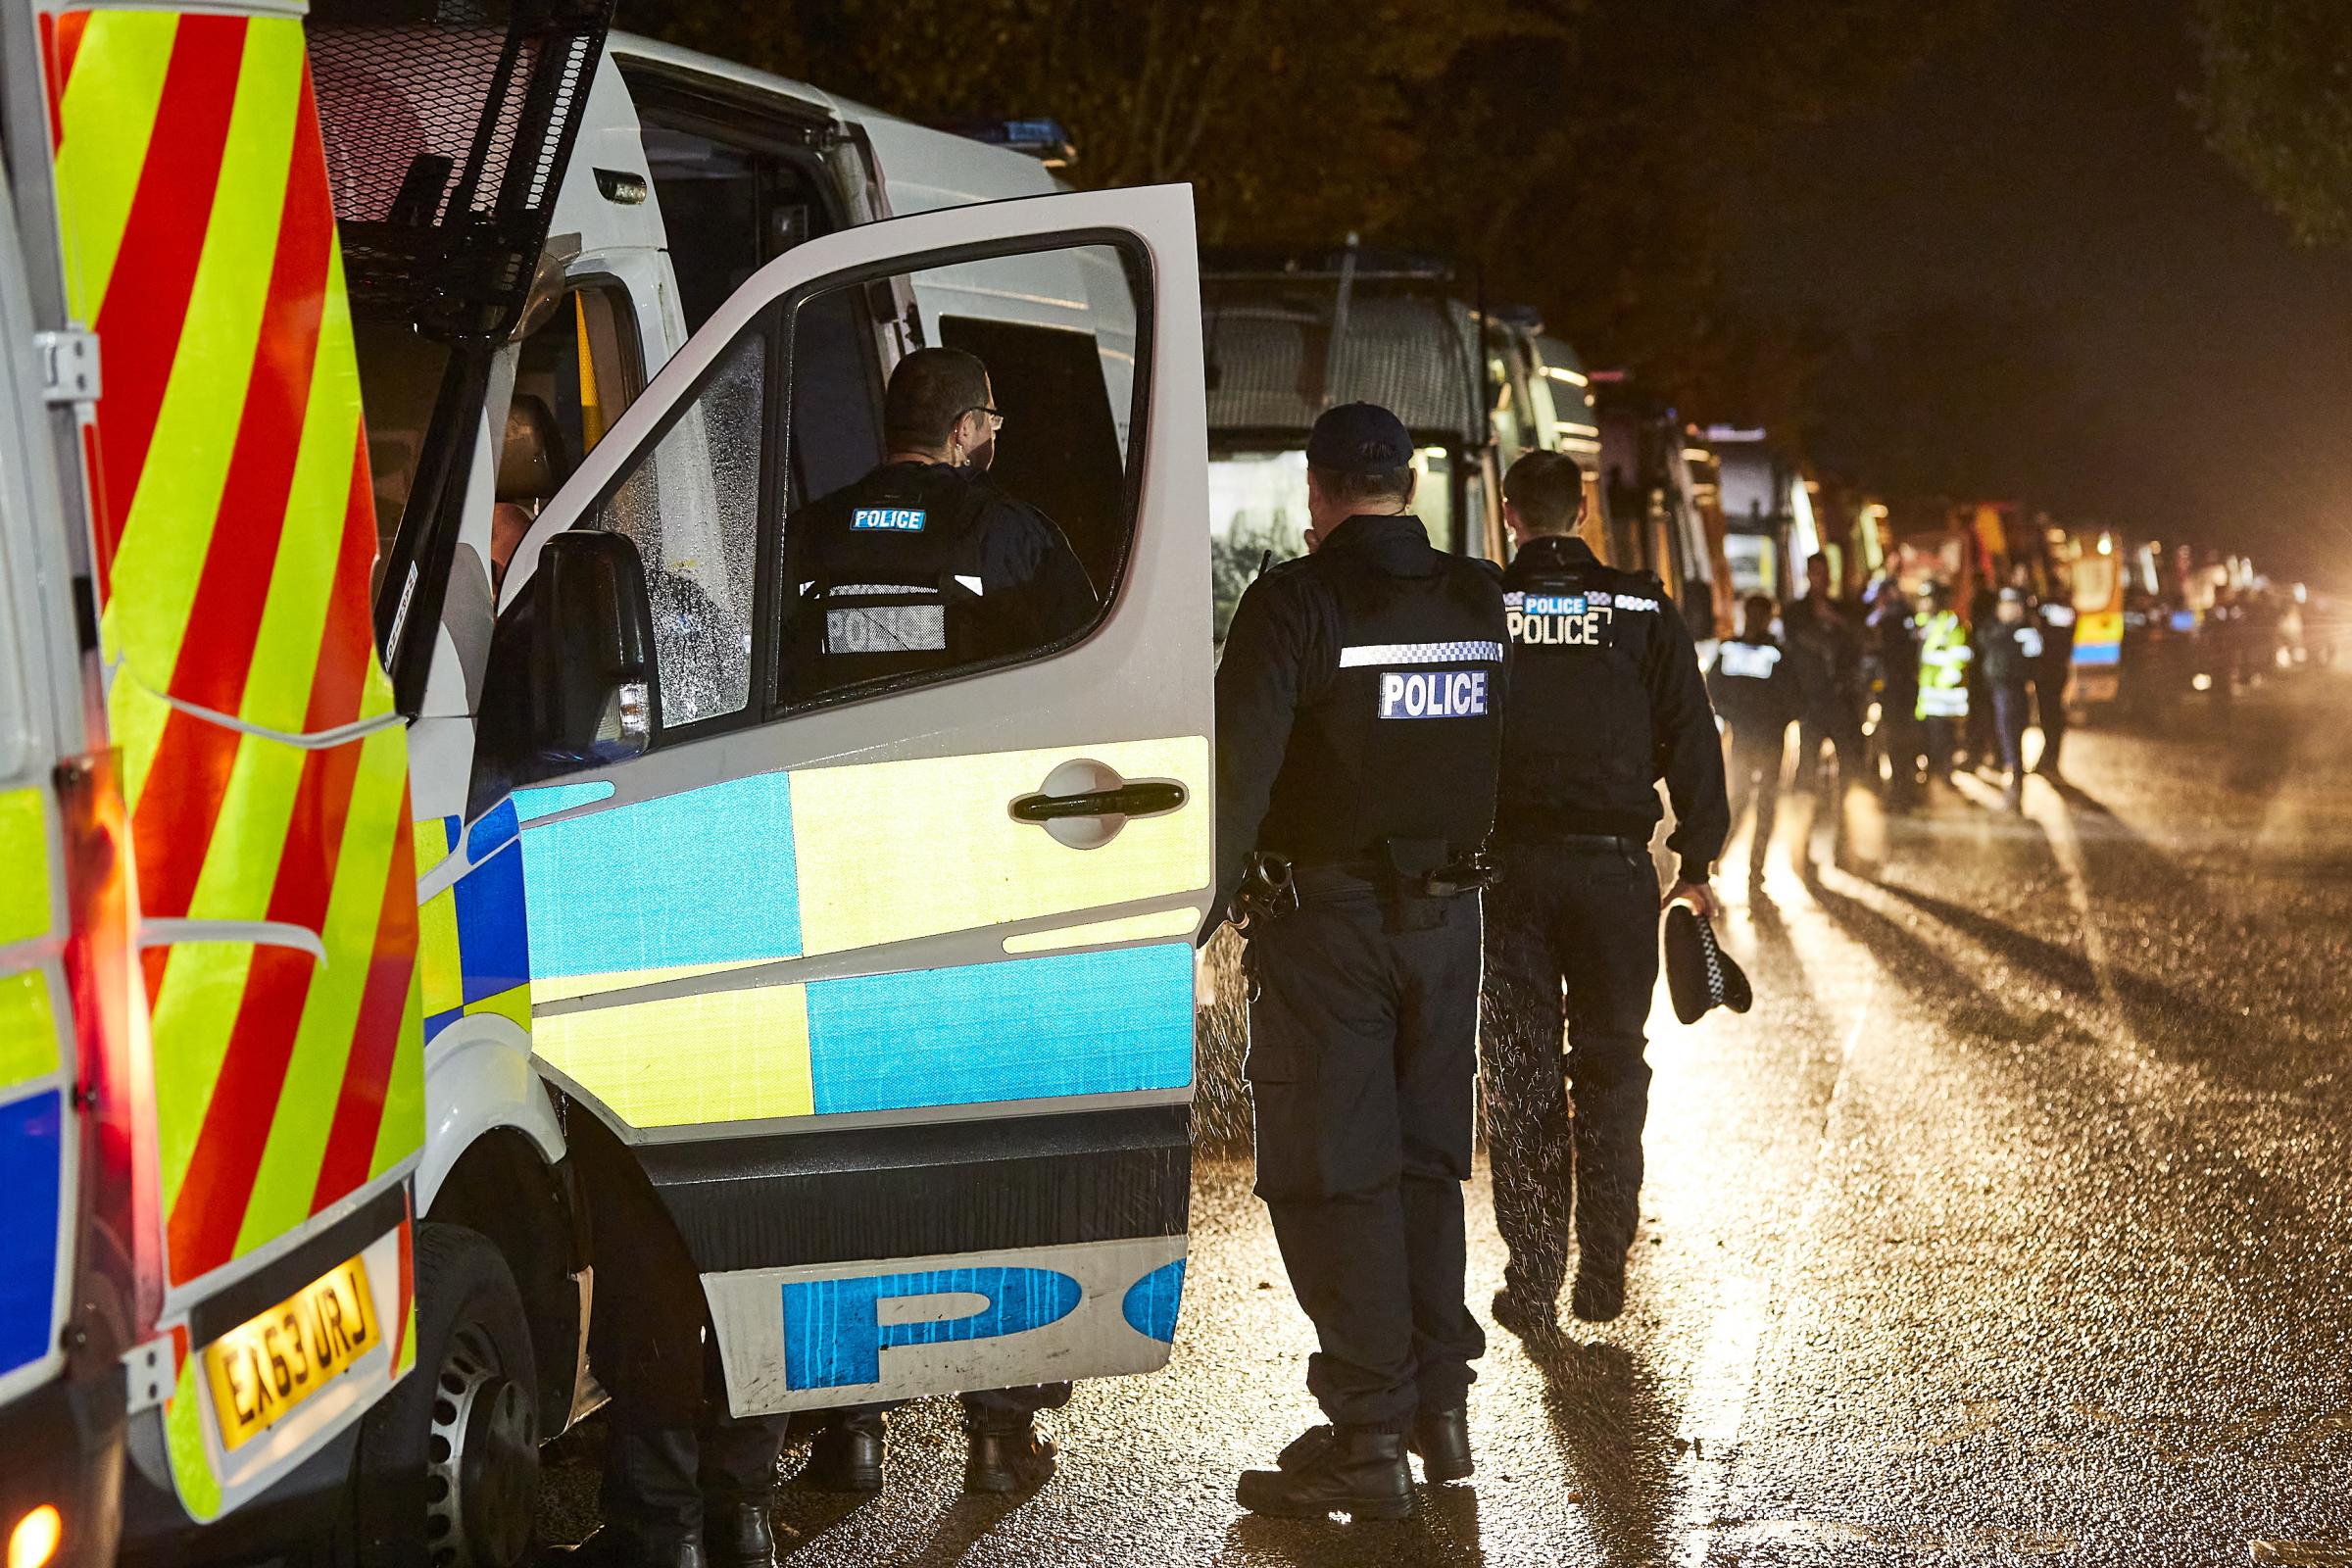 Operation Shark saw 19 people arrested following the execution of 17 warrants in harlow. Photo: Essex Police